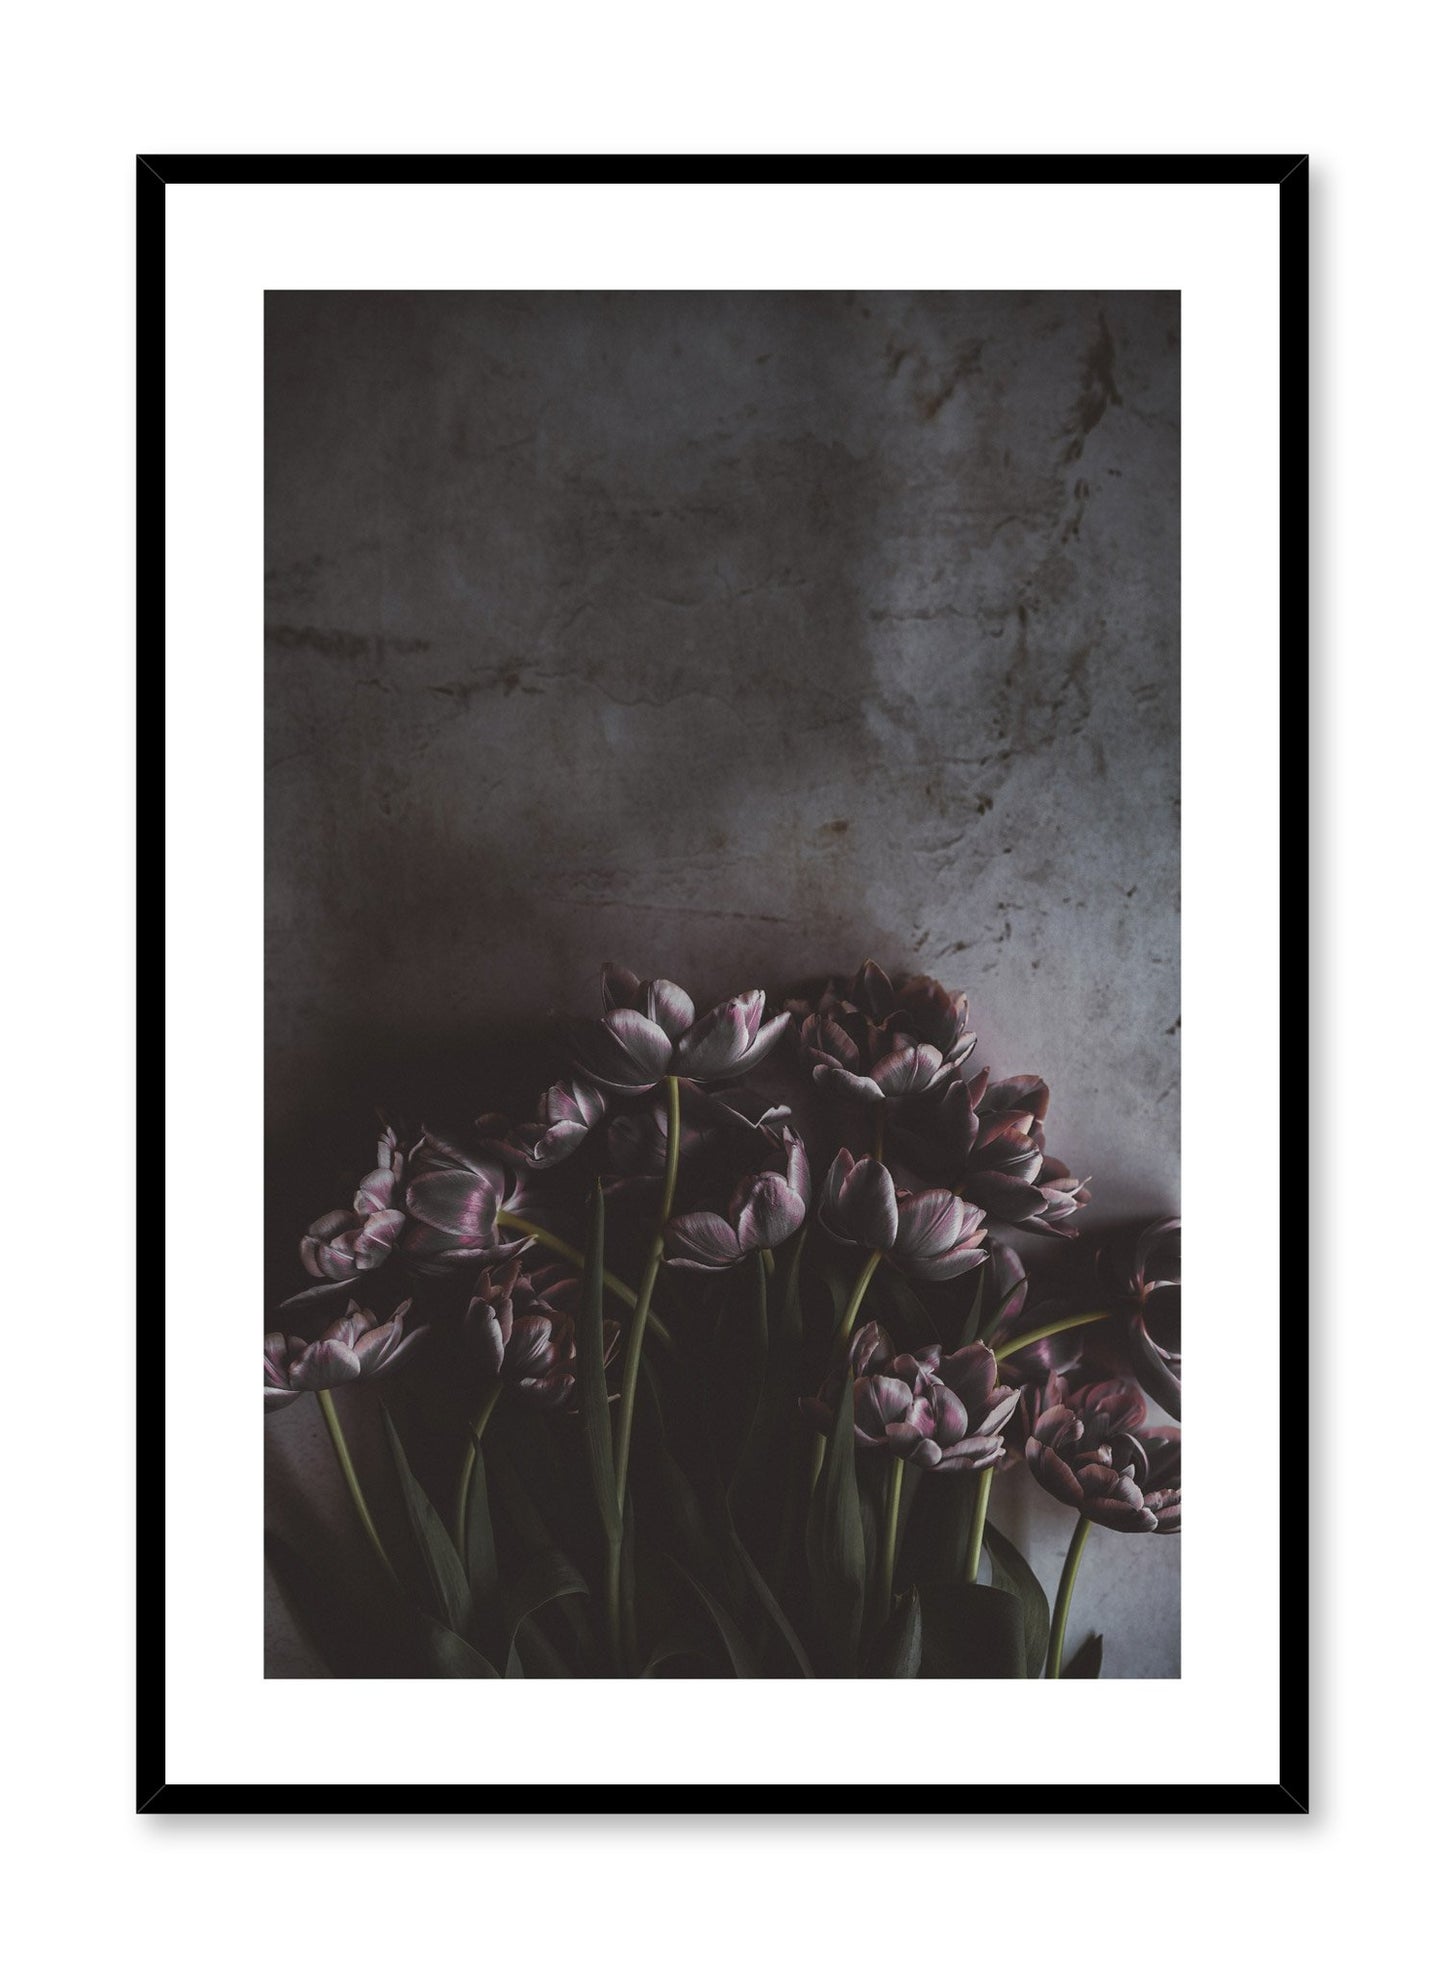 "Purple Symphony" is a flower photography poster by Opposite Wall of dark purple tulips over a textured industrial wall. 